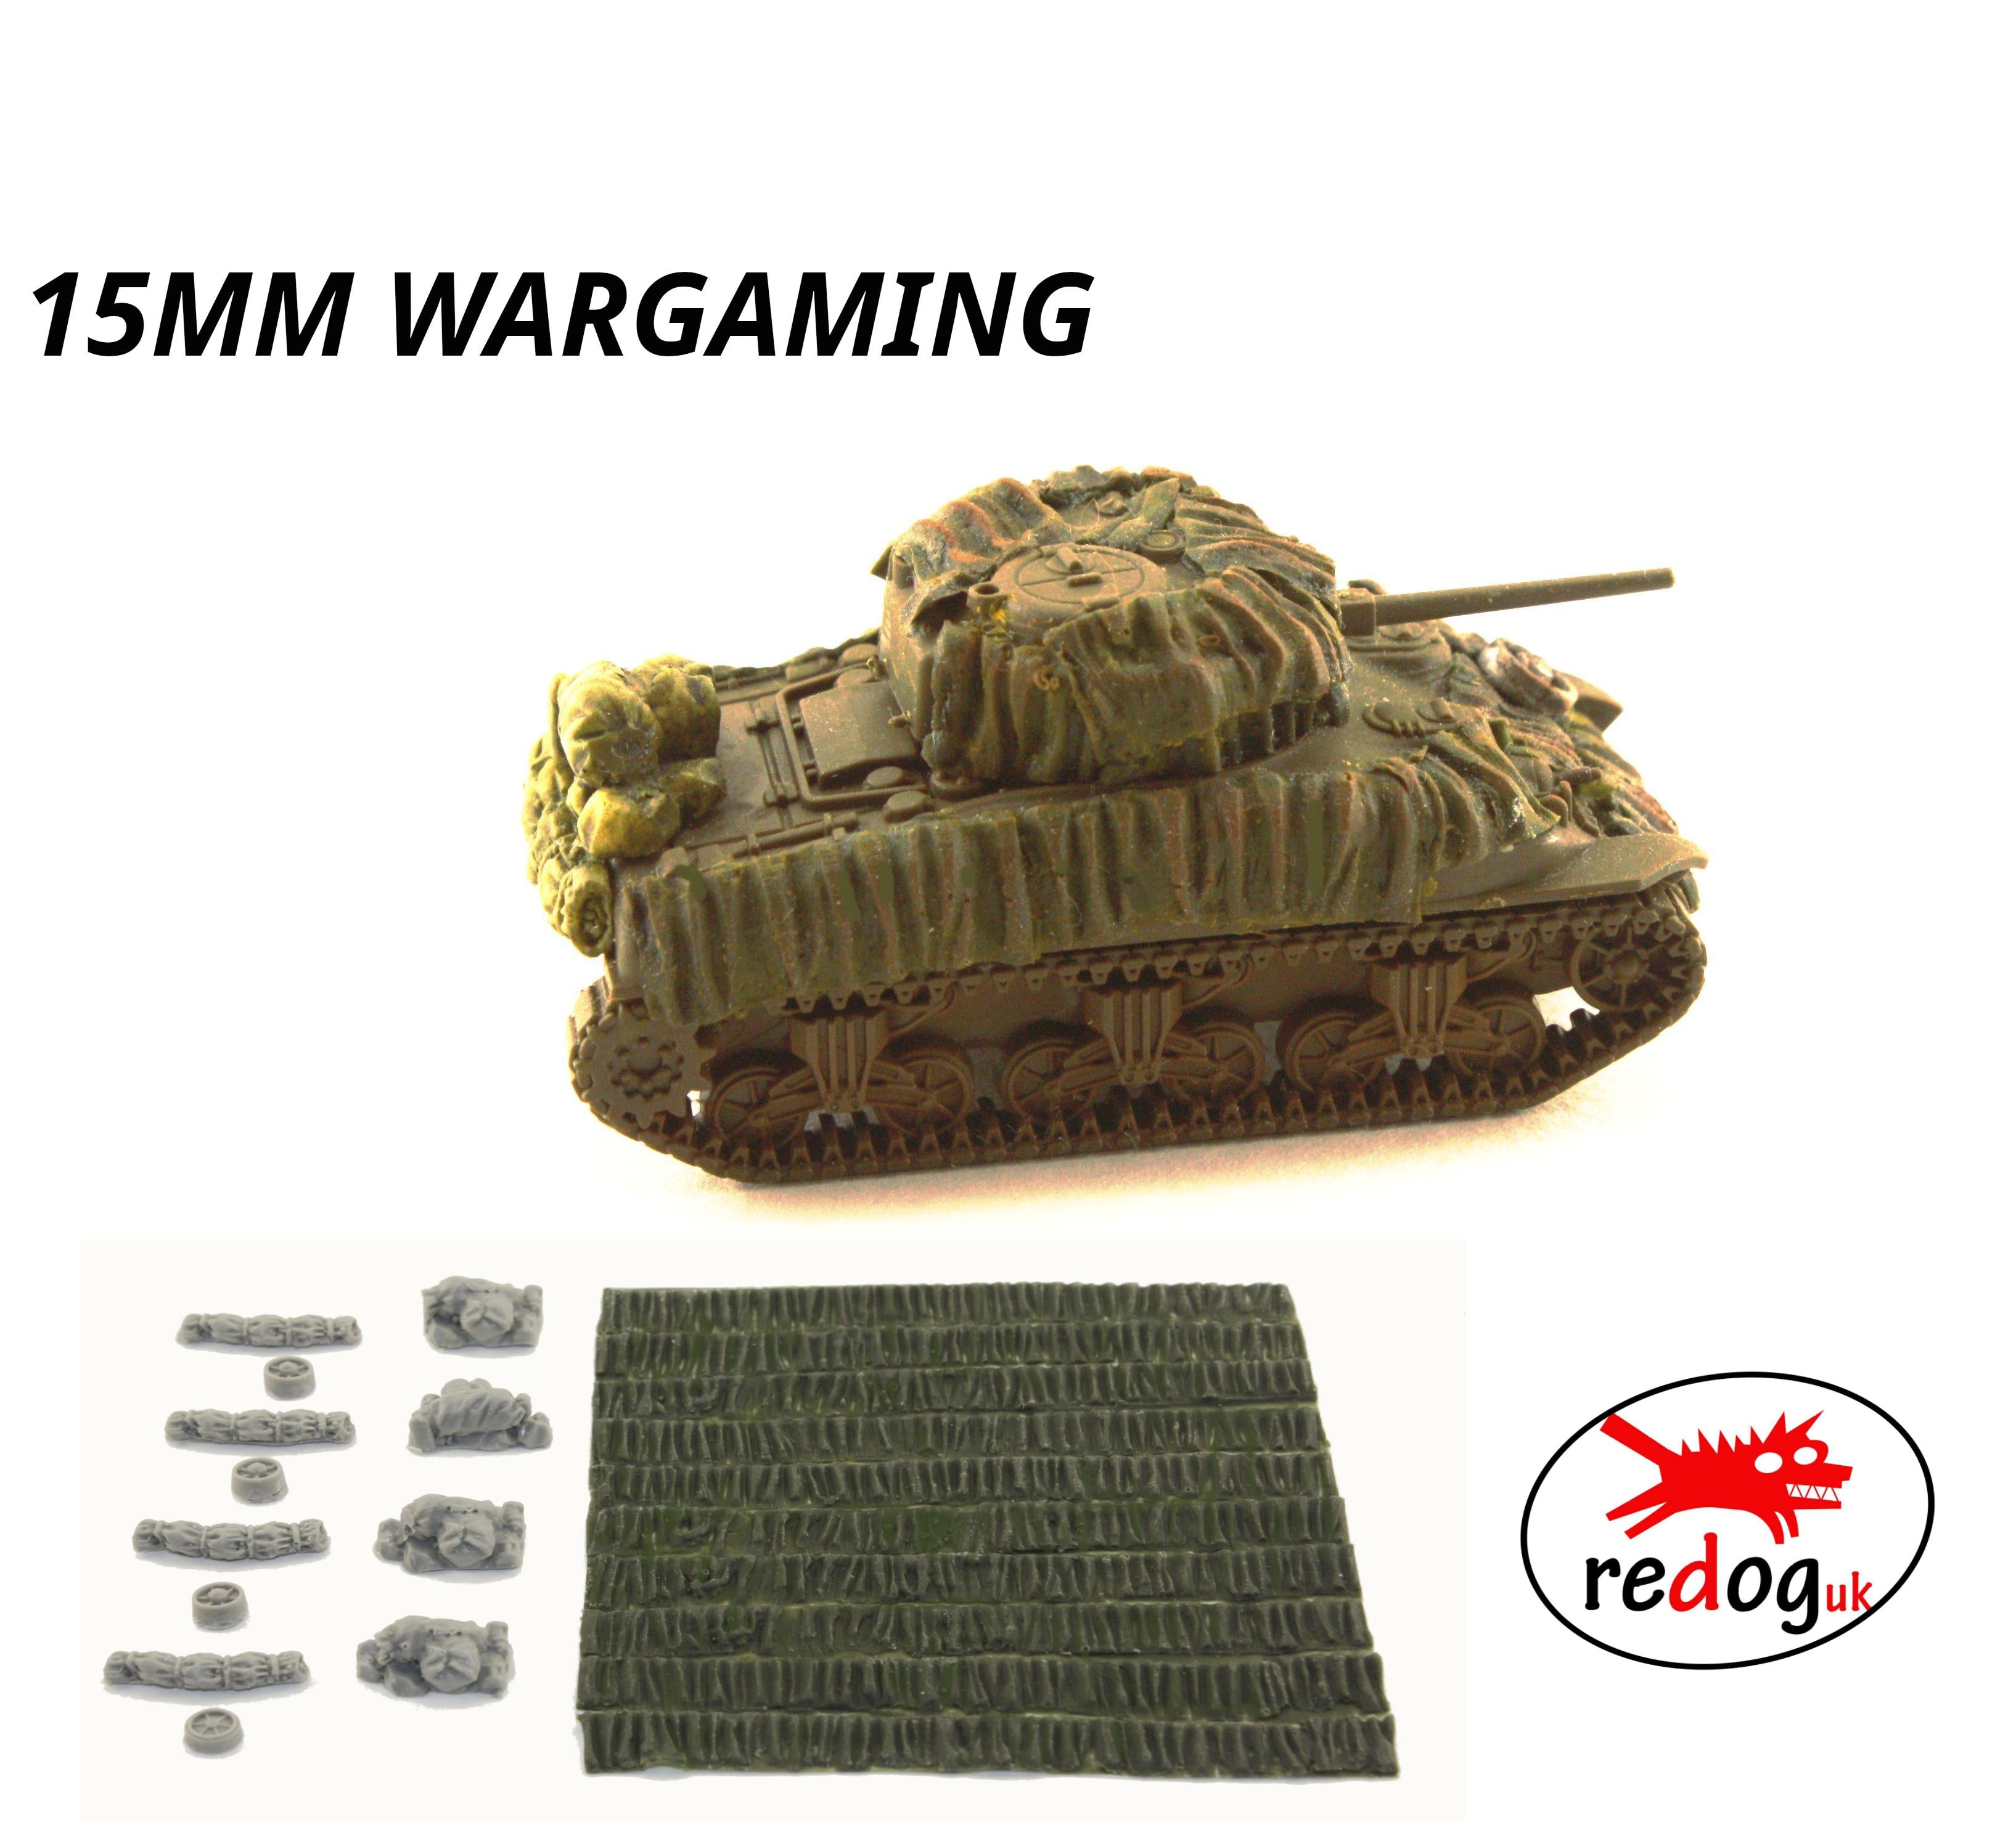 15mm 1/100th Hessian Strips and stowage kit / Flames of War, Team Yankee 2 - redoguk